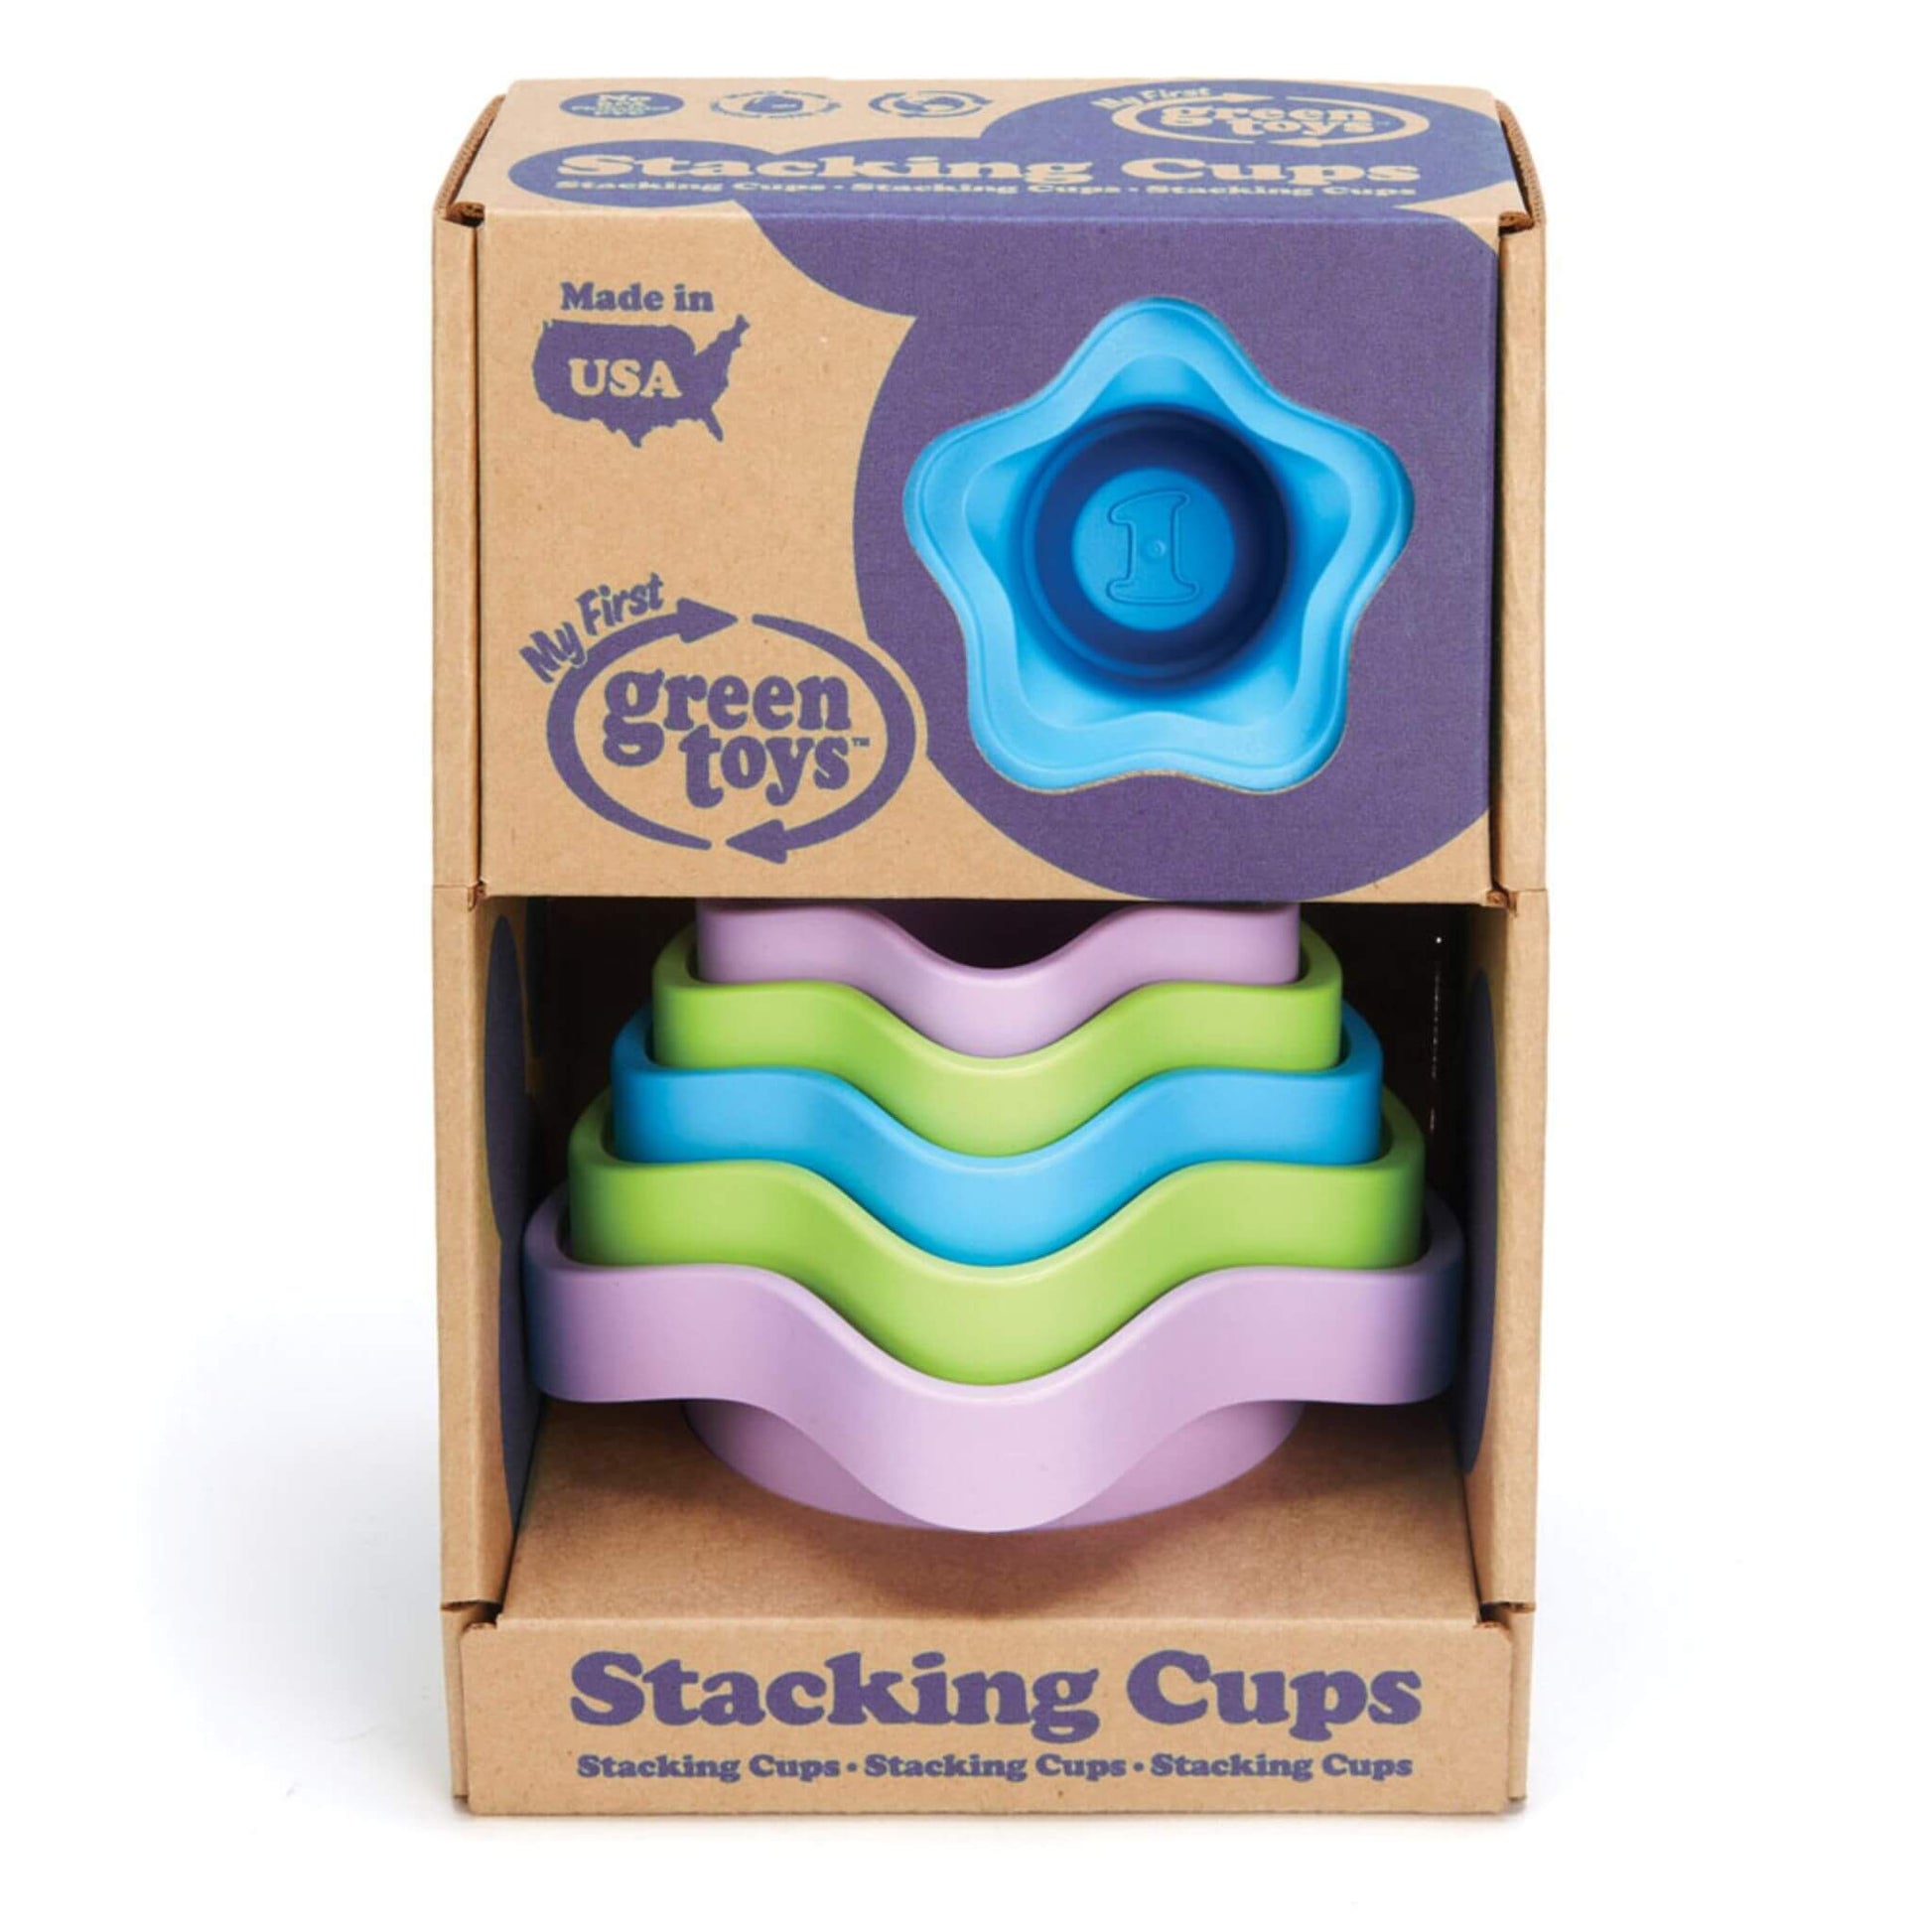 Green Toys Stacking Cups - recycled plastic toys in eco packaging